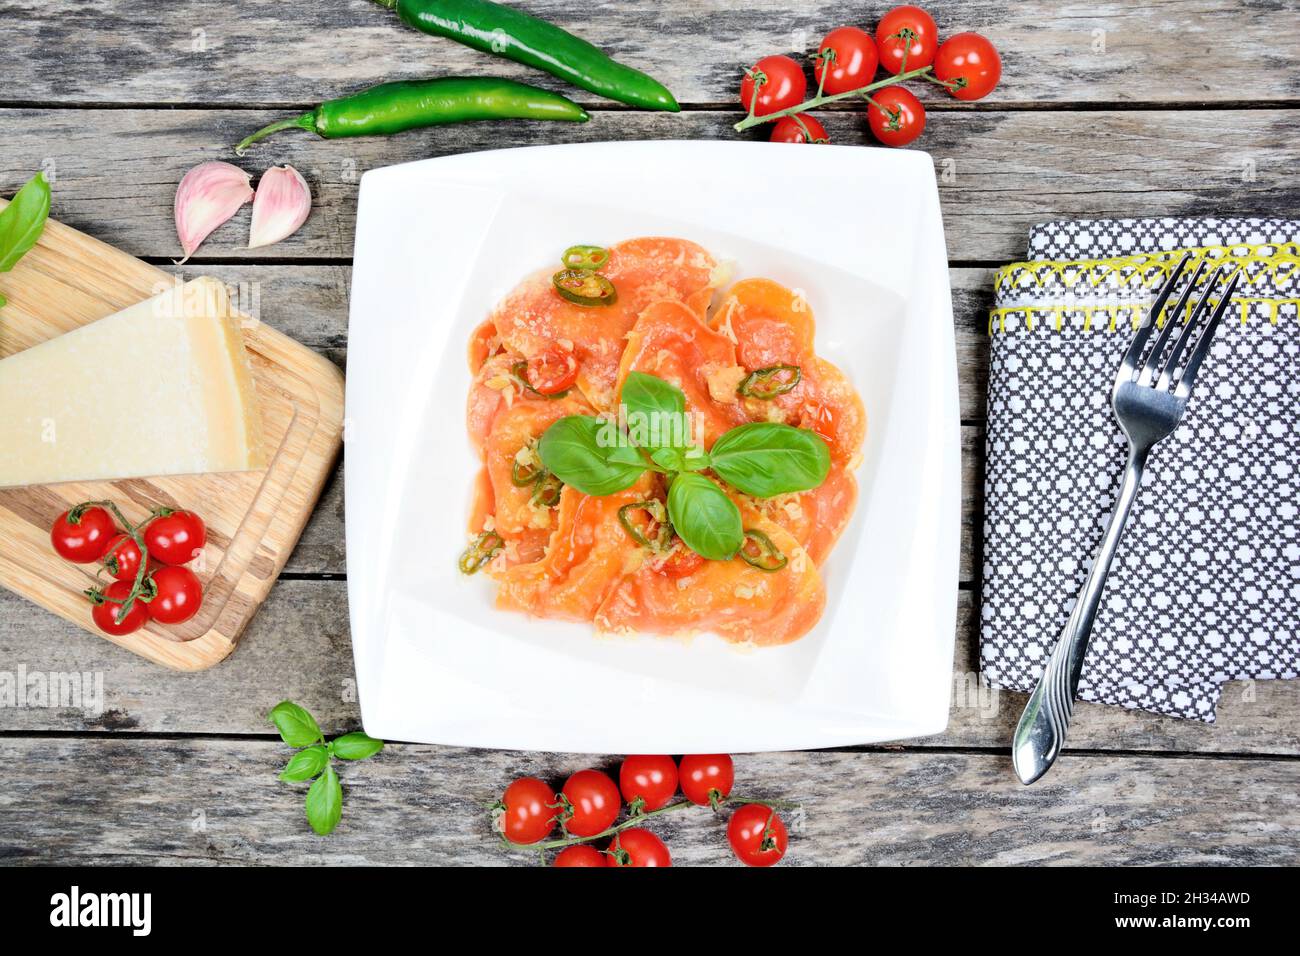 Red heart ravioli in a plate with parmesan and basil on table Stock Photo